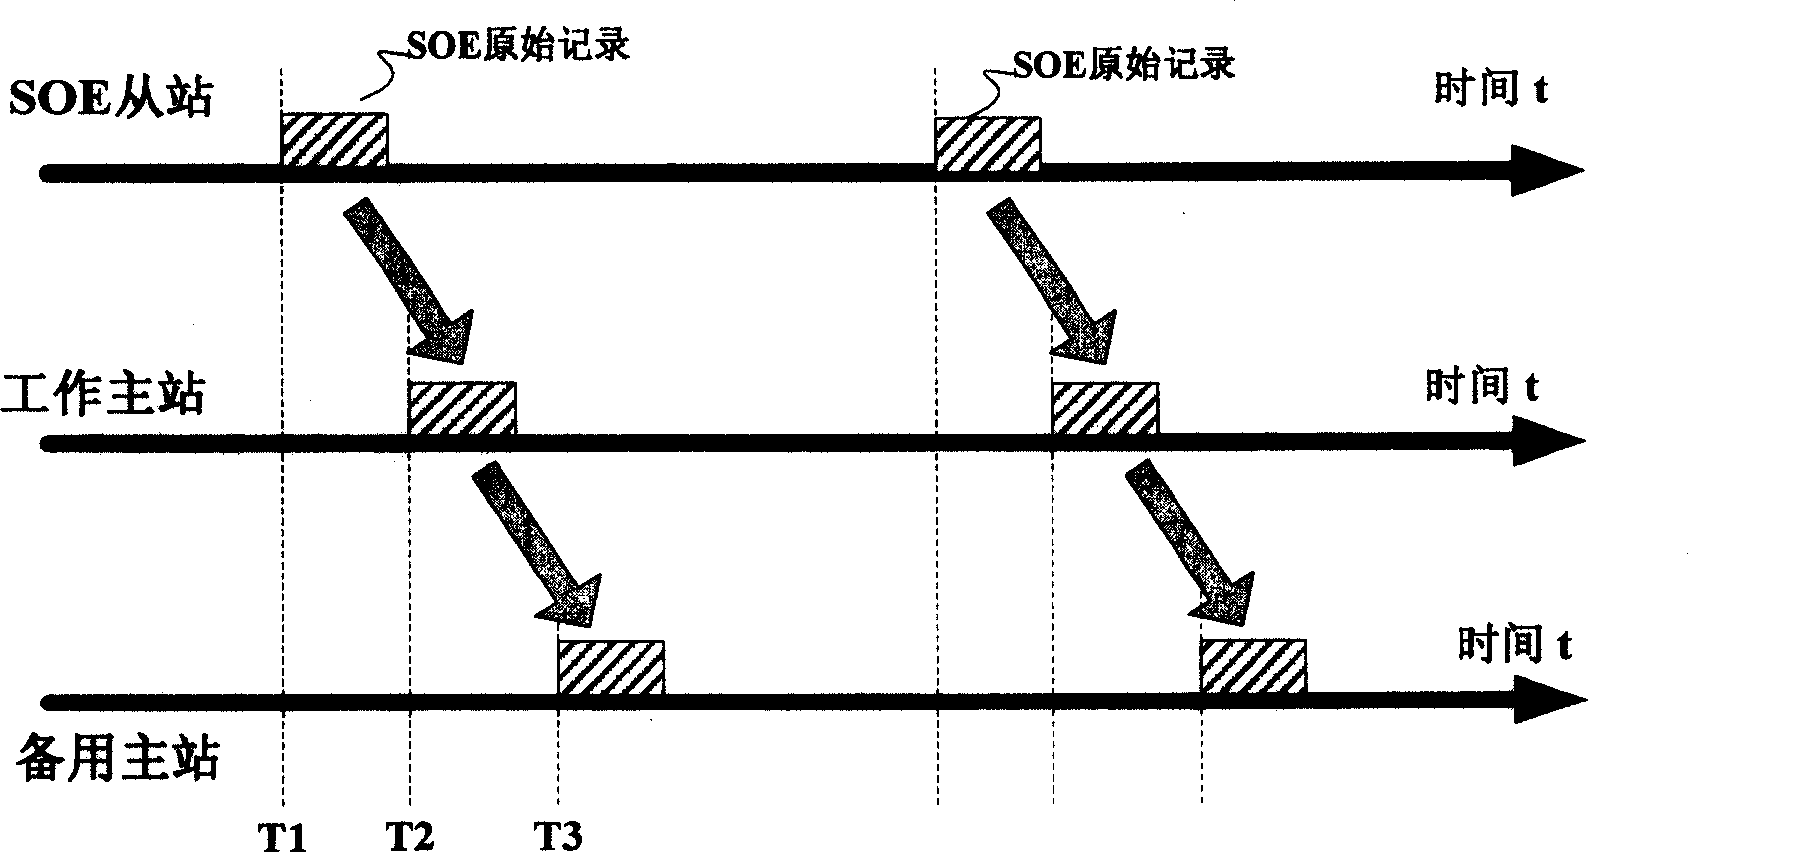 Method for implementing working main station and standby main station synchronous recording